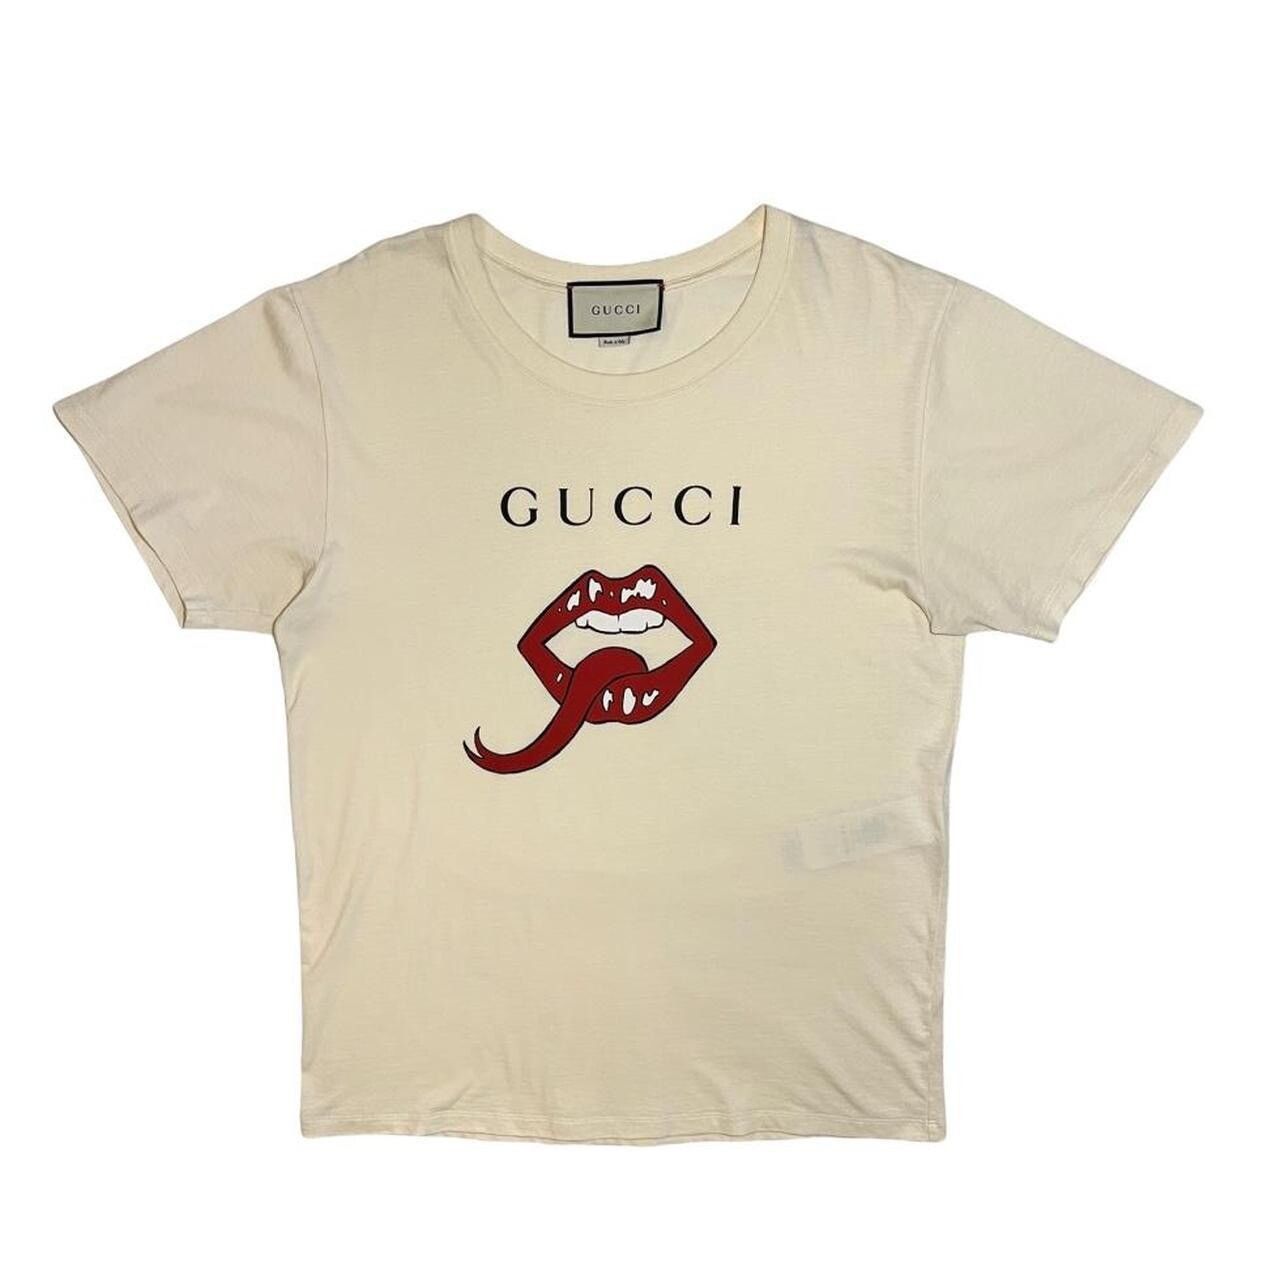 Gucci Gucci Sunkissed Mouth and Lips T Shirt | Grailed